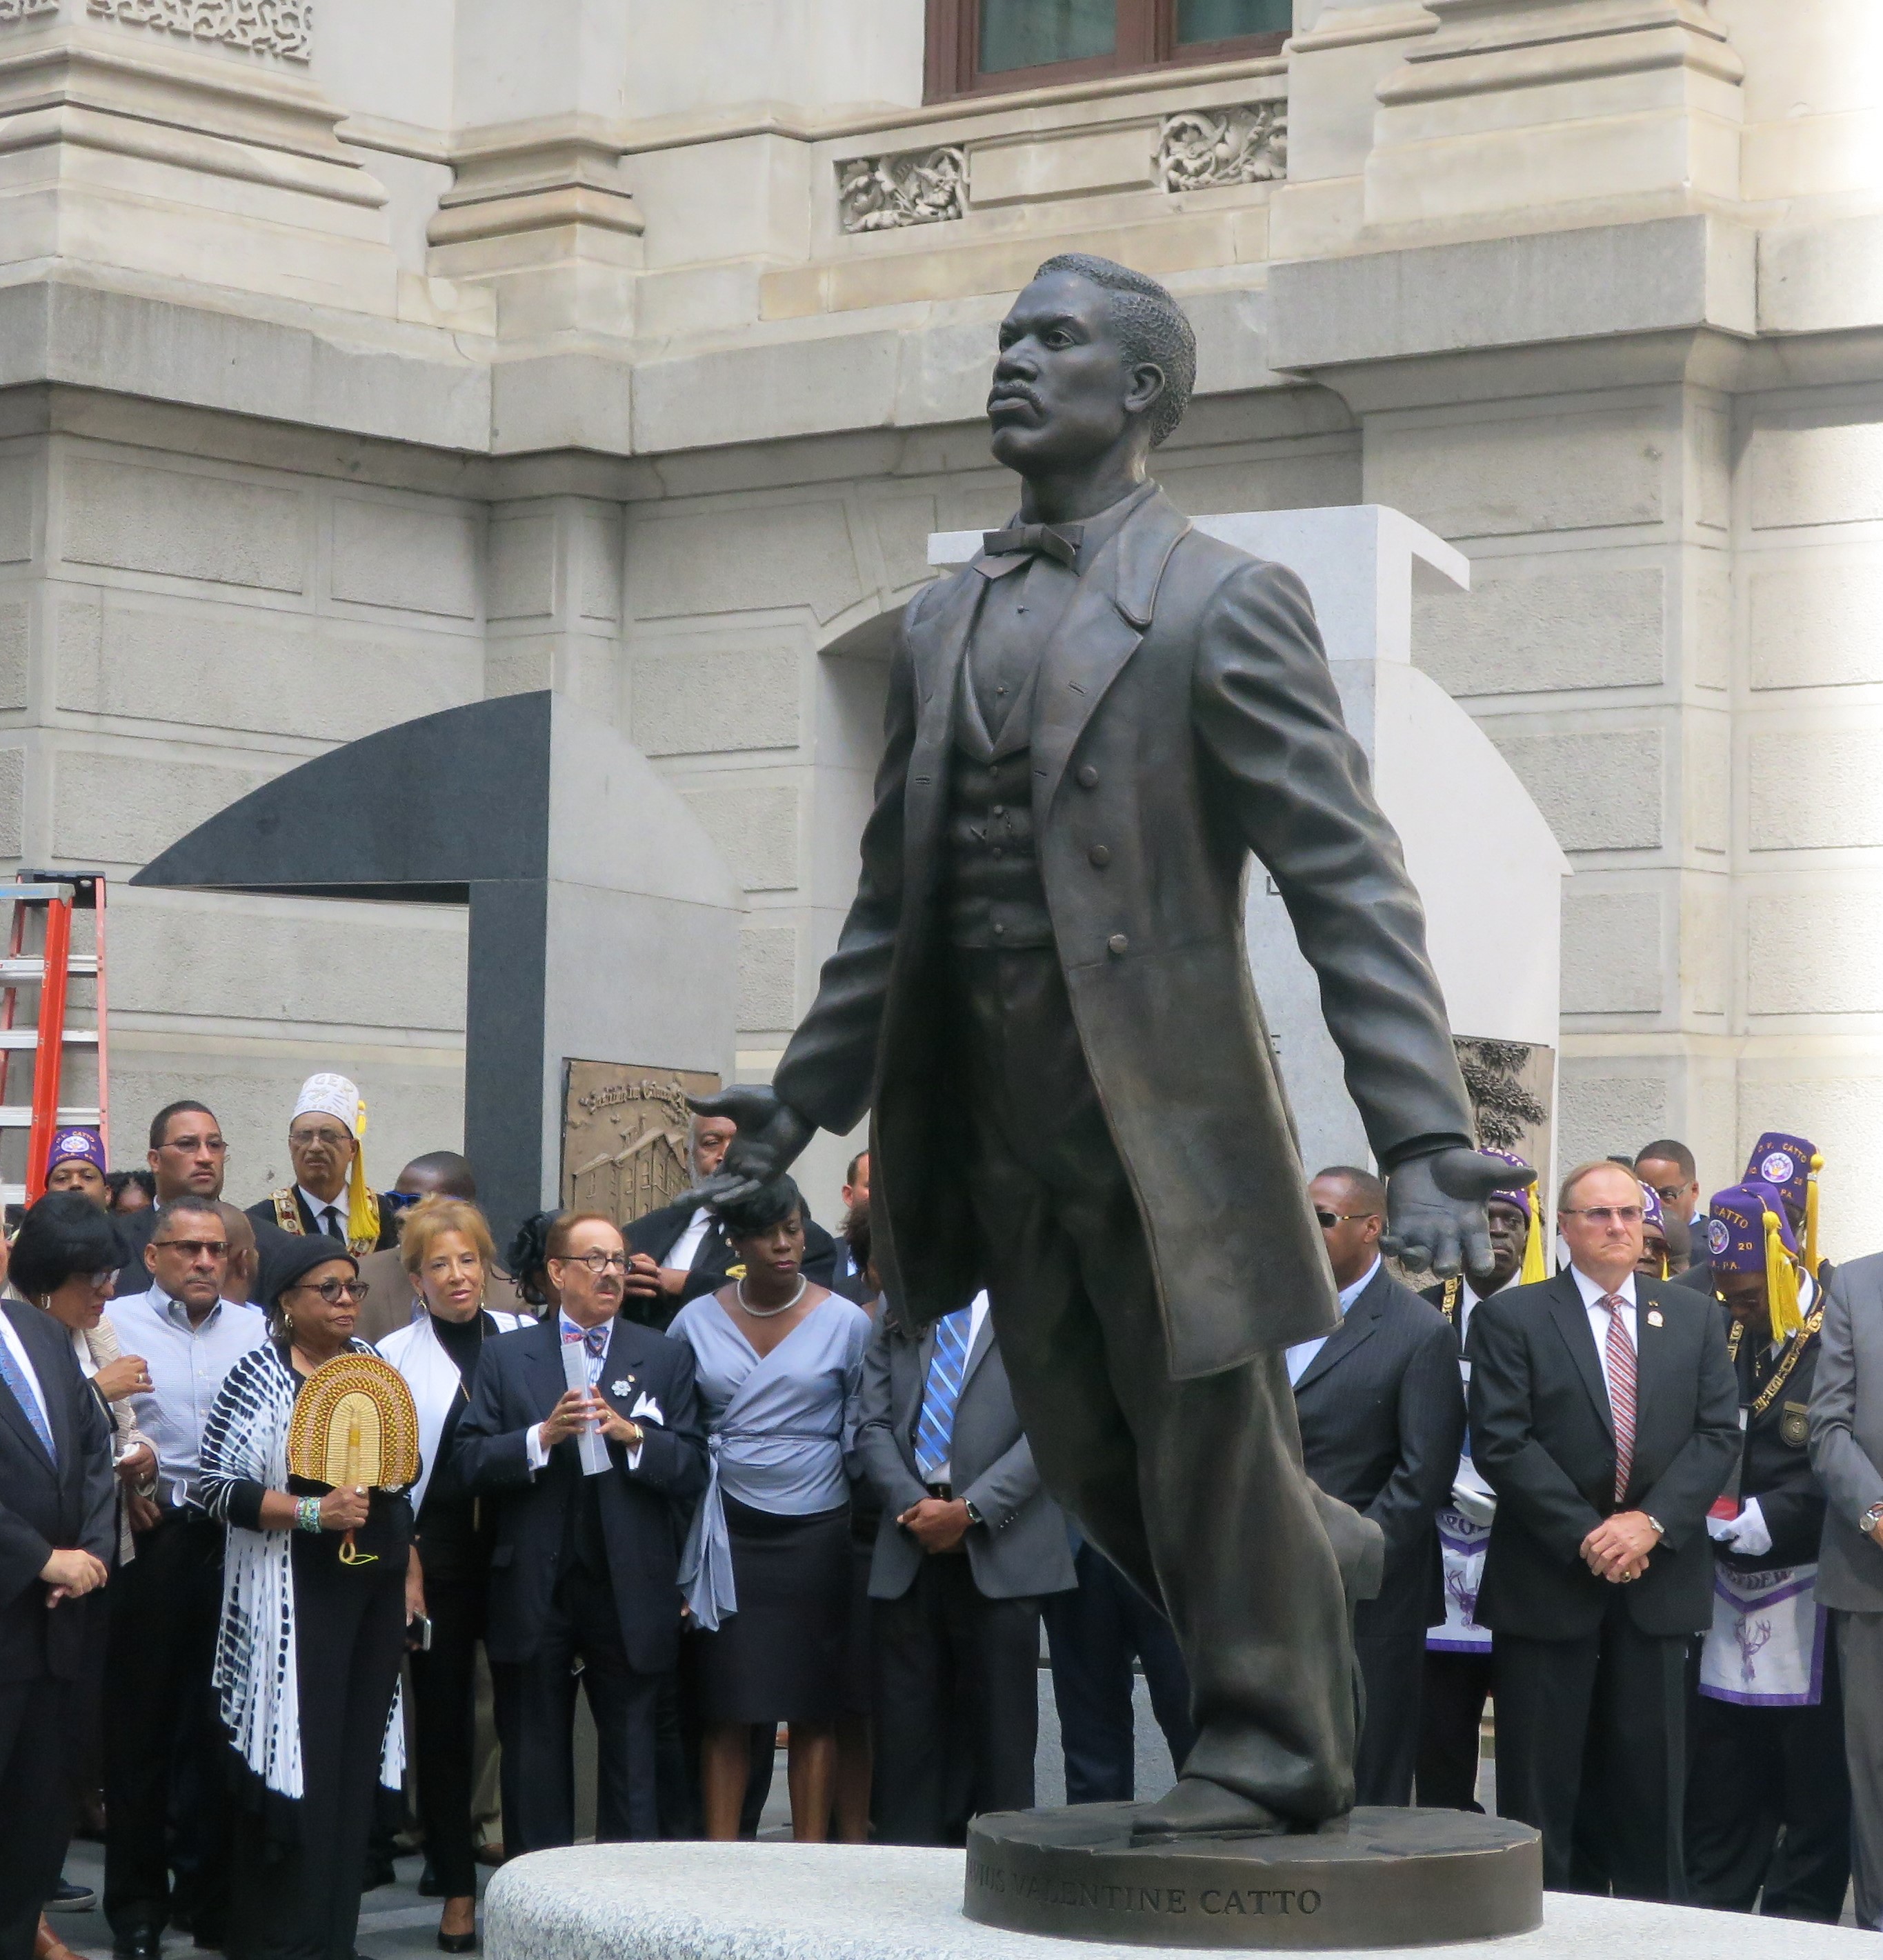 Octavius V. Catto; Educator, Activist and First African-American Hero to Be Honored with a Monument in Philadelphia